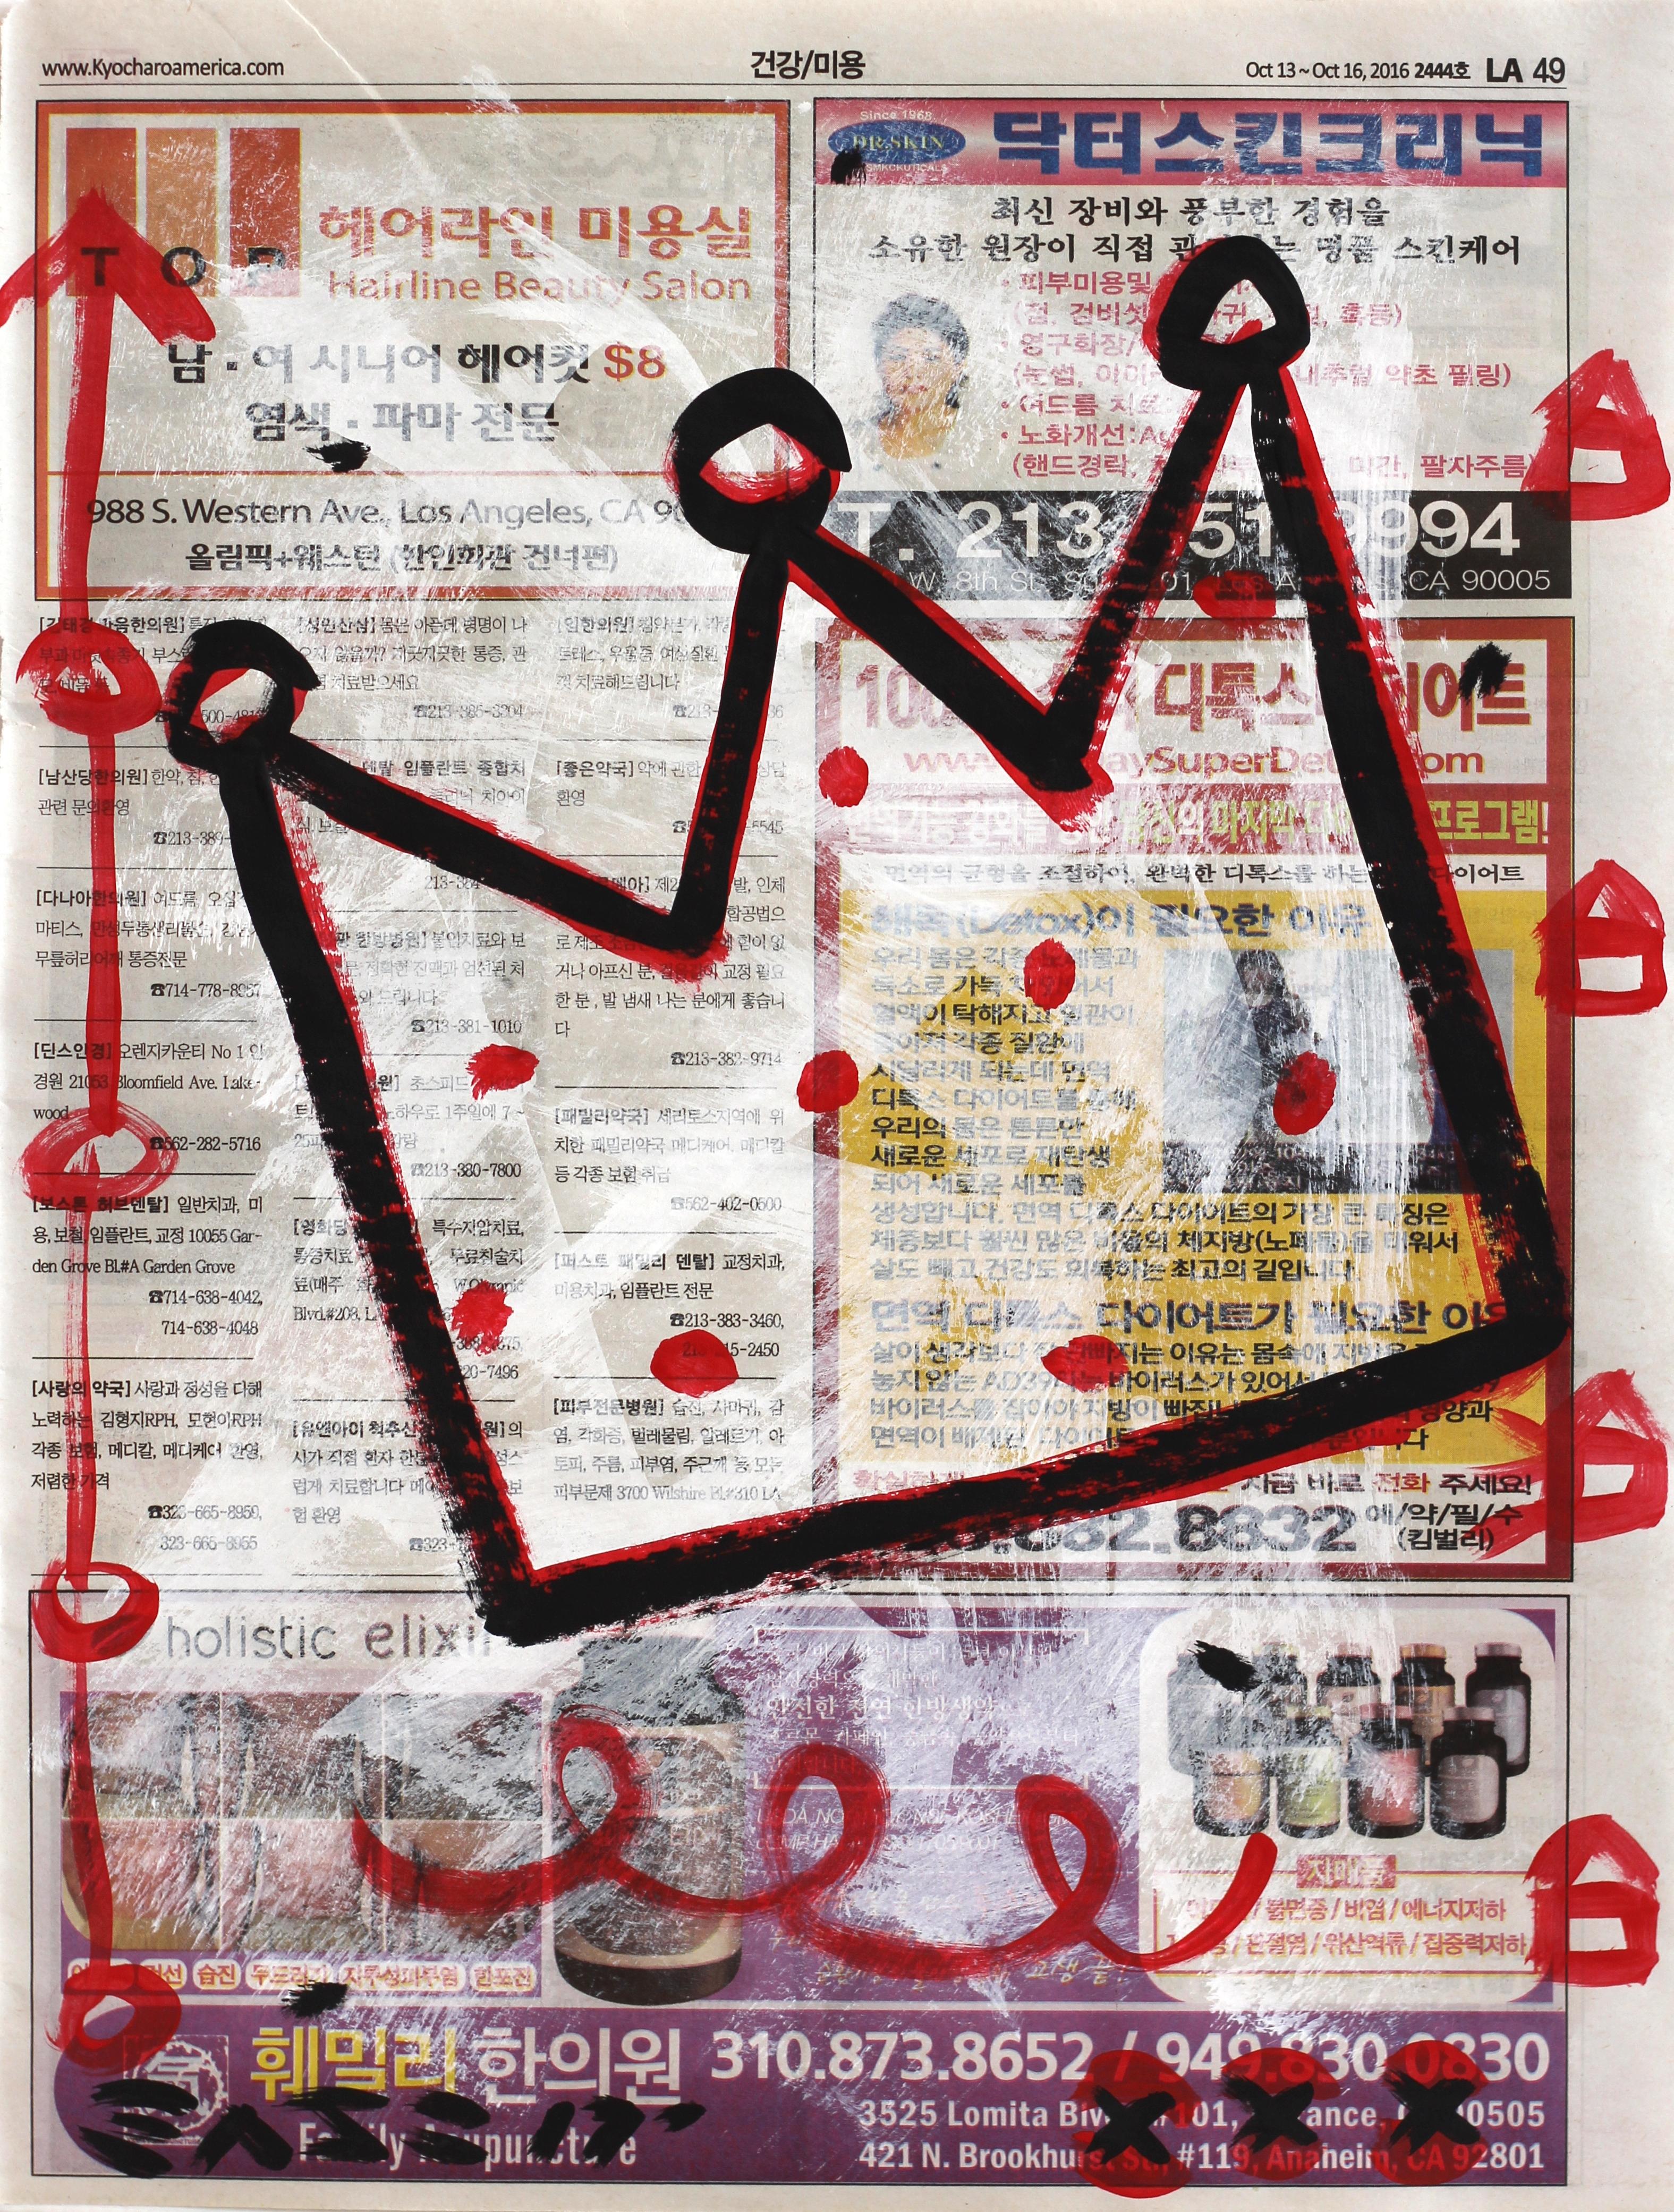 Gary John Figurative Painting - Regal Being - Original Black and Red Crown on Newsprint